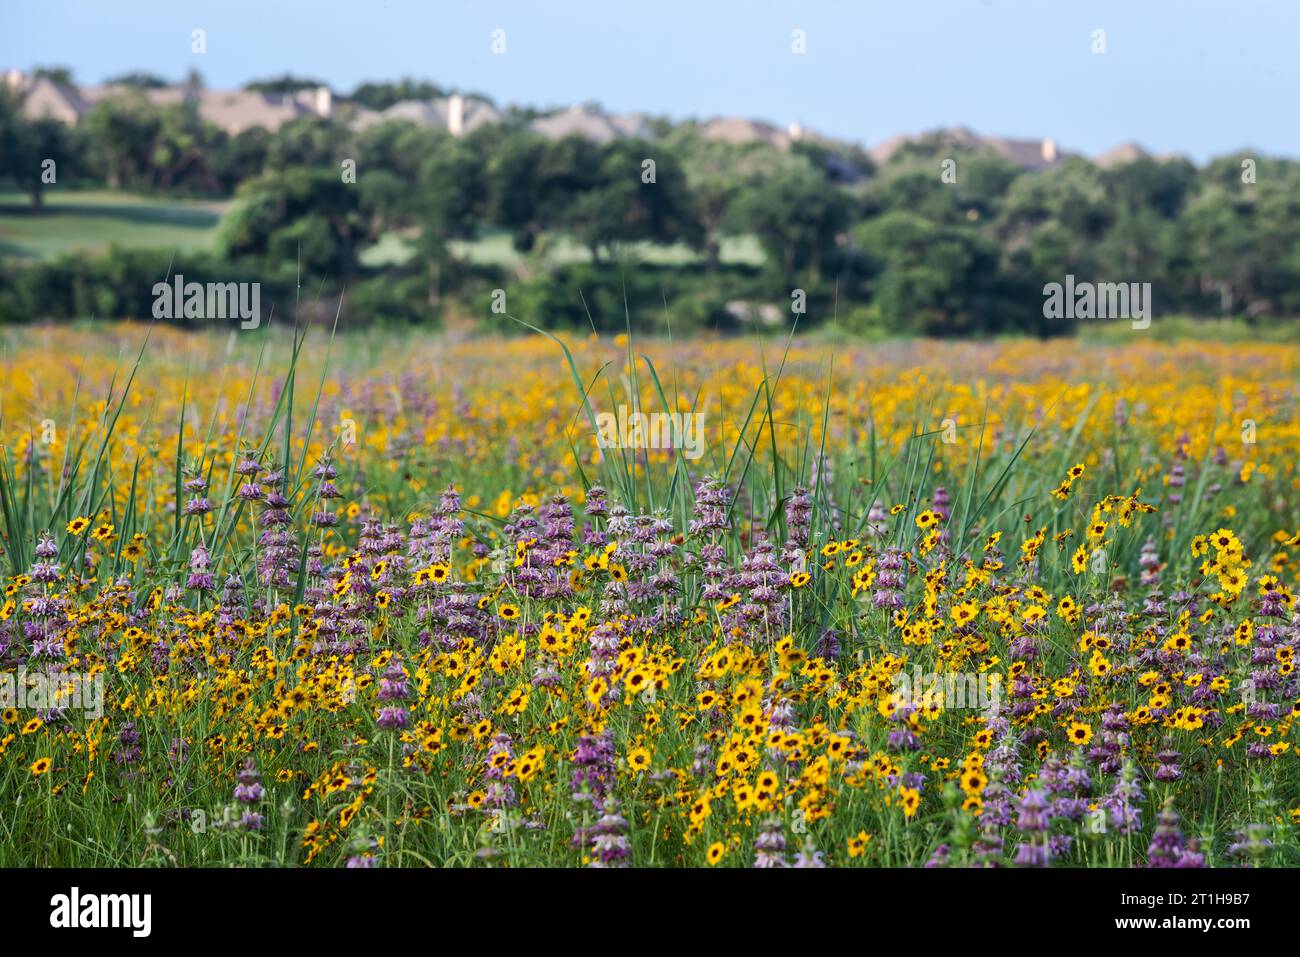 Native wildflowers bursting with yellow, purple, and green colors in a park near a lake in the spring season, Austin, Texas America, USA Stock Photo